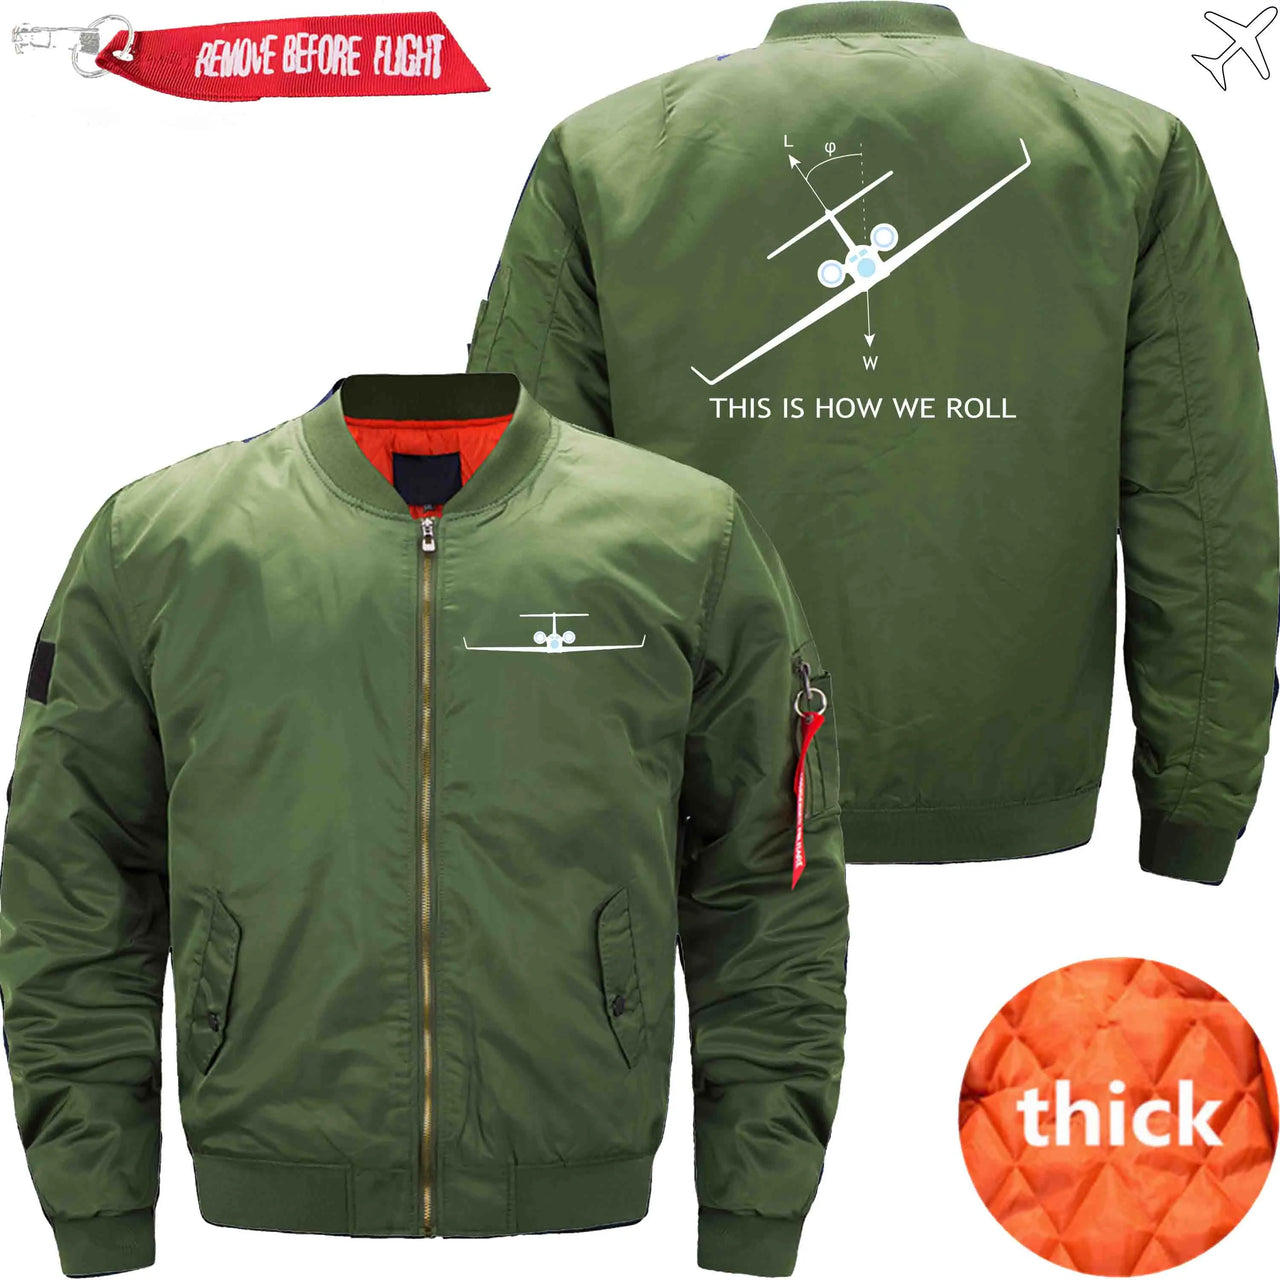 THIS HOW WE ROLL AIRPLANE PILOT JACKET THE AV8R